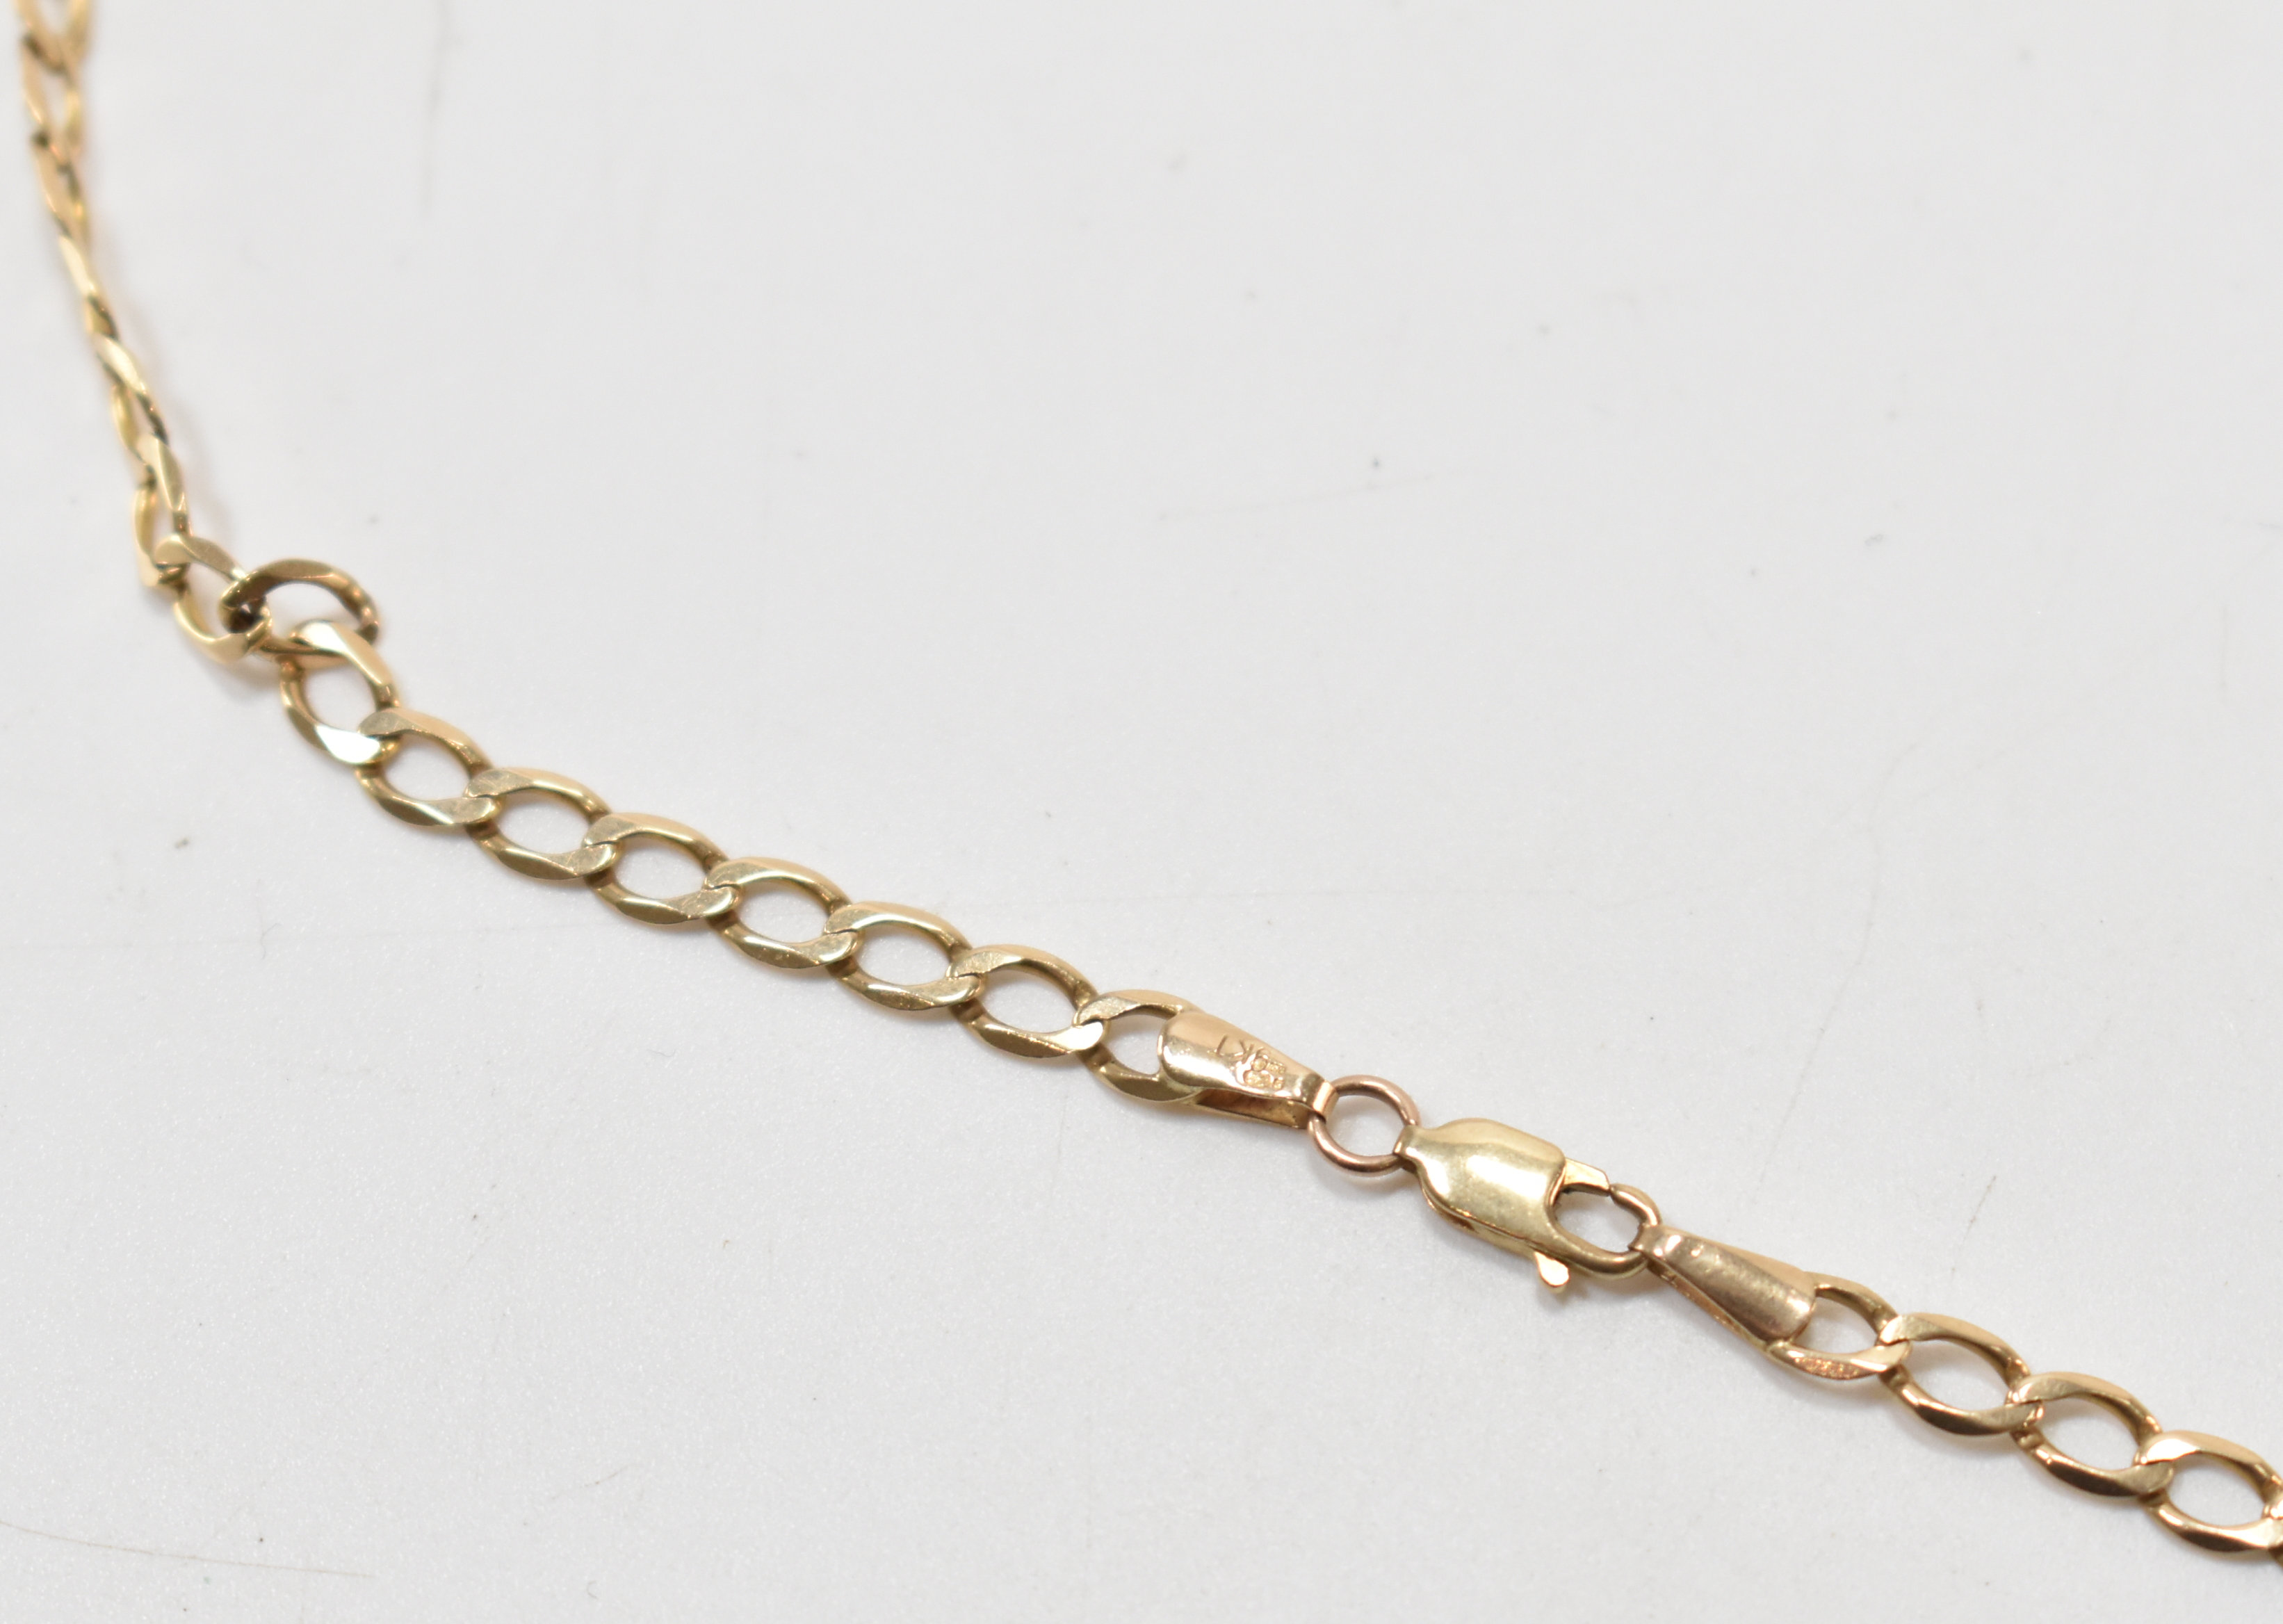 HALLMARKED 9CT GOLD CURB LINK CHAIN NECKLACE - Image 5 of 5